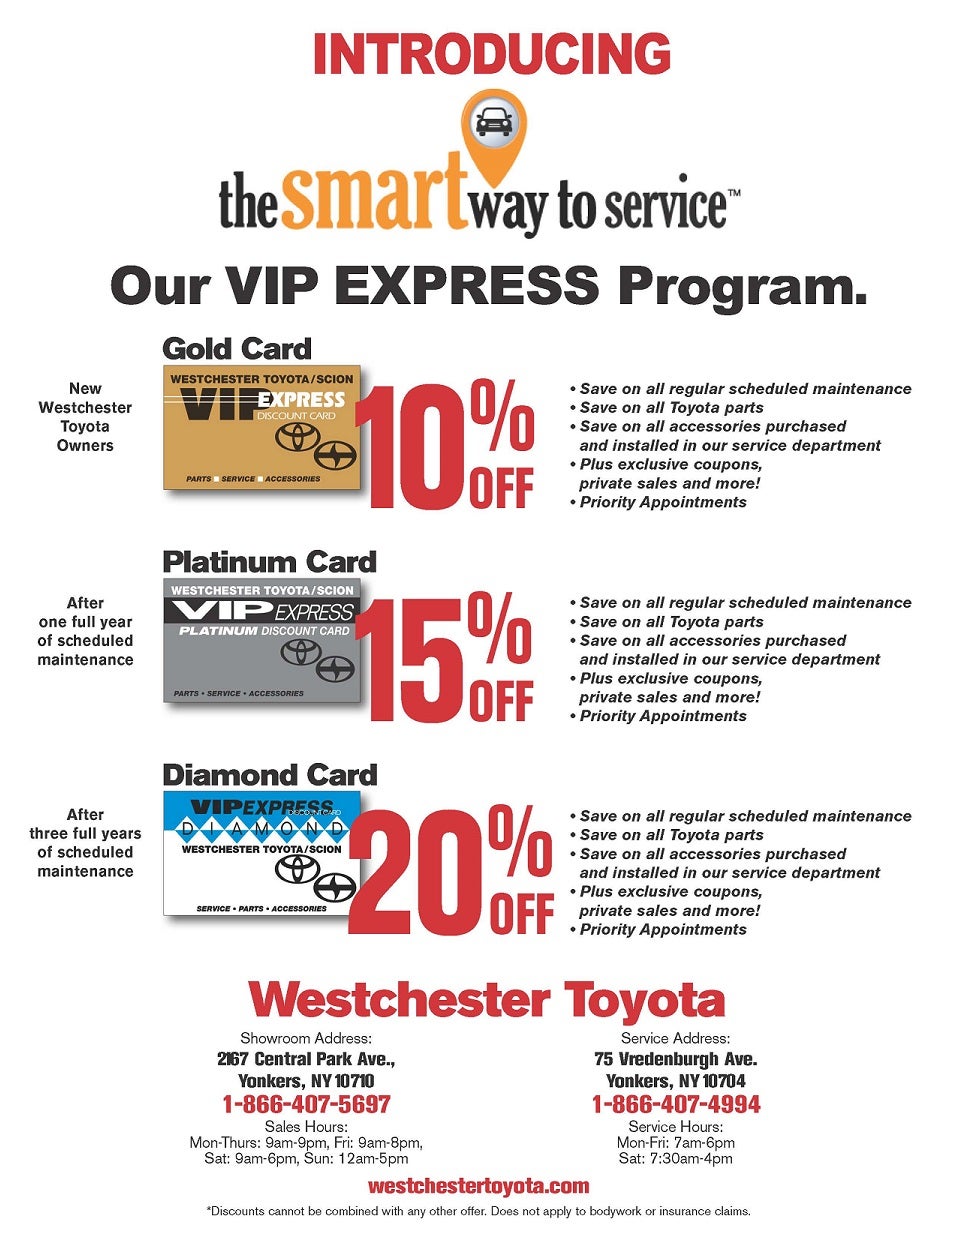 Westchester Toyota VIP Express Program - the smart way to service